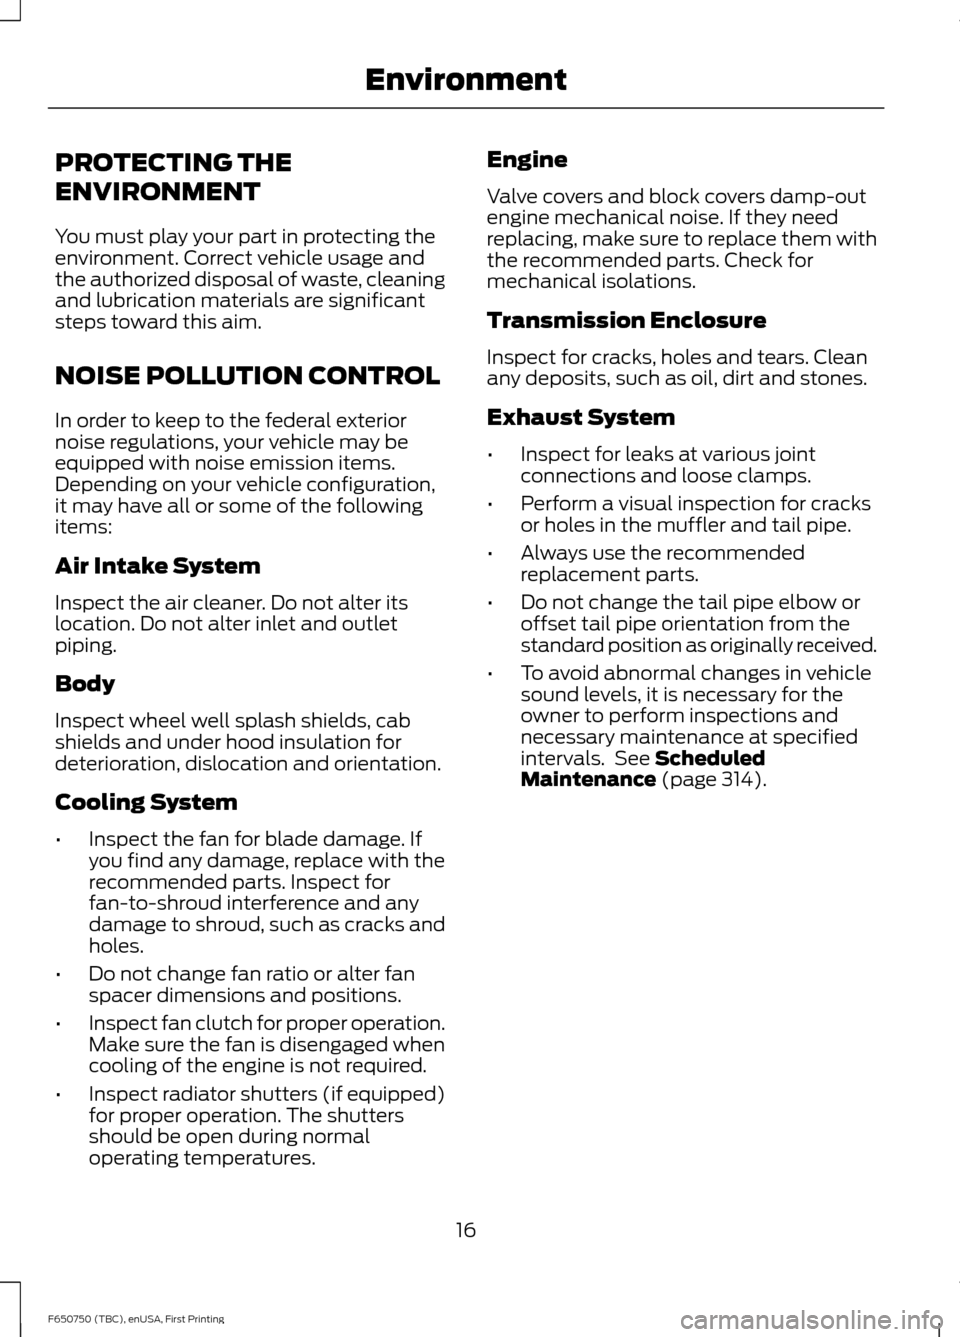 FORD F650 2016 13.G User Guide PROTECTING THE
ENVIRONMENT
You must play your part in protecting the
environment. Correct vehicle usage and
the authorized disposal of waste, cleaning
and lubrication materials are significant
steps t